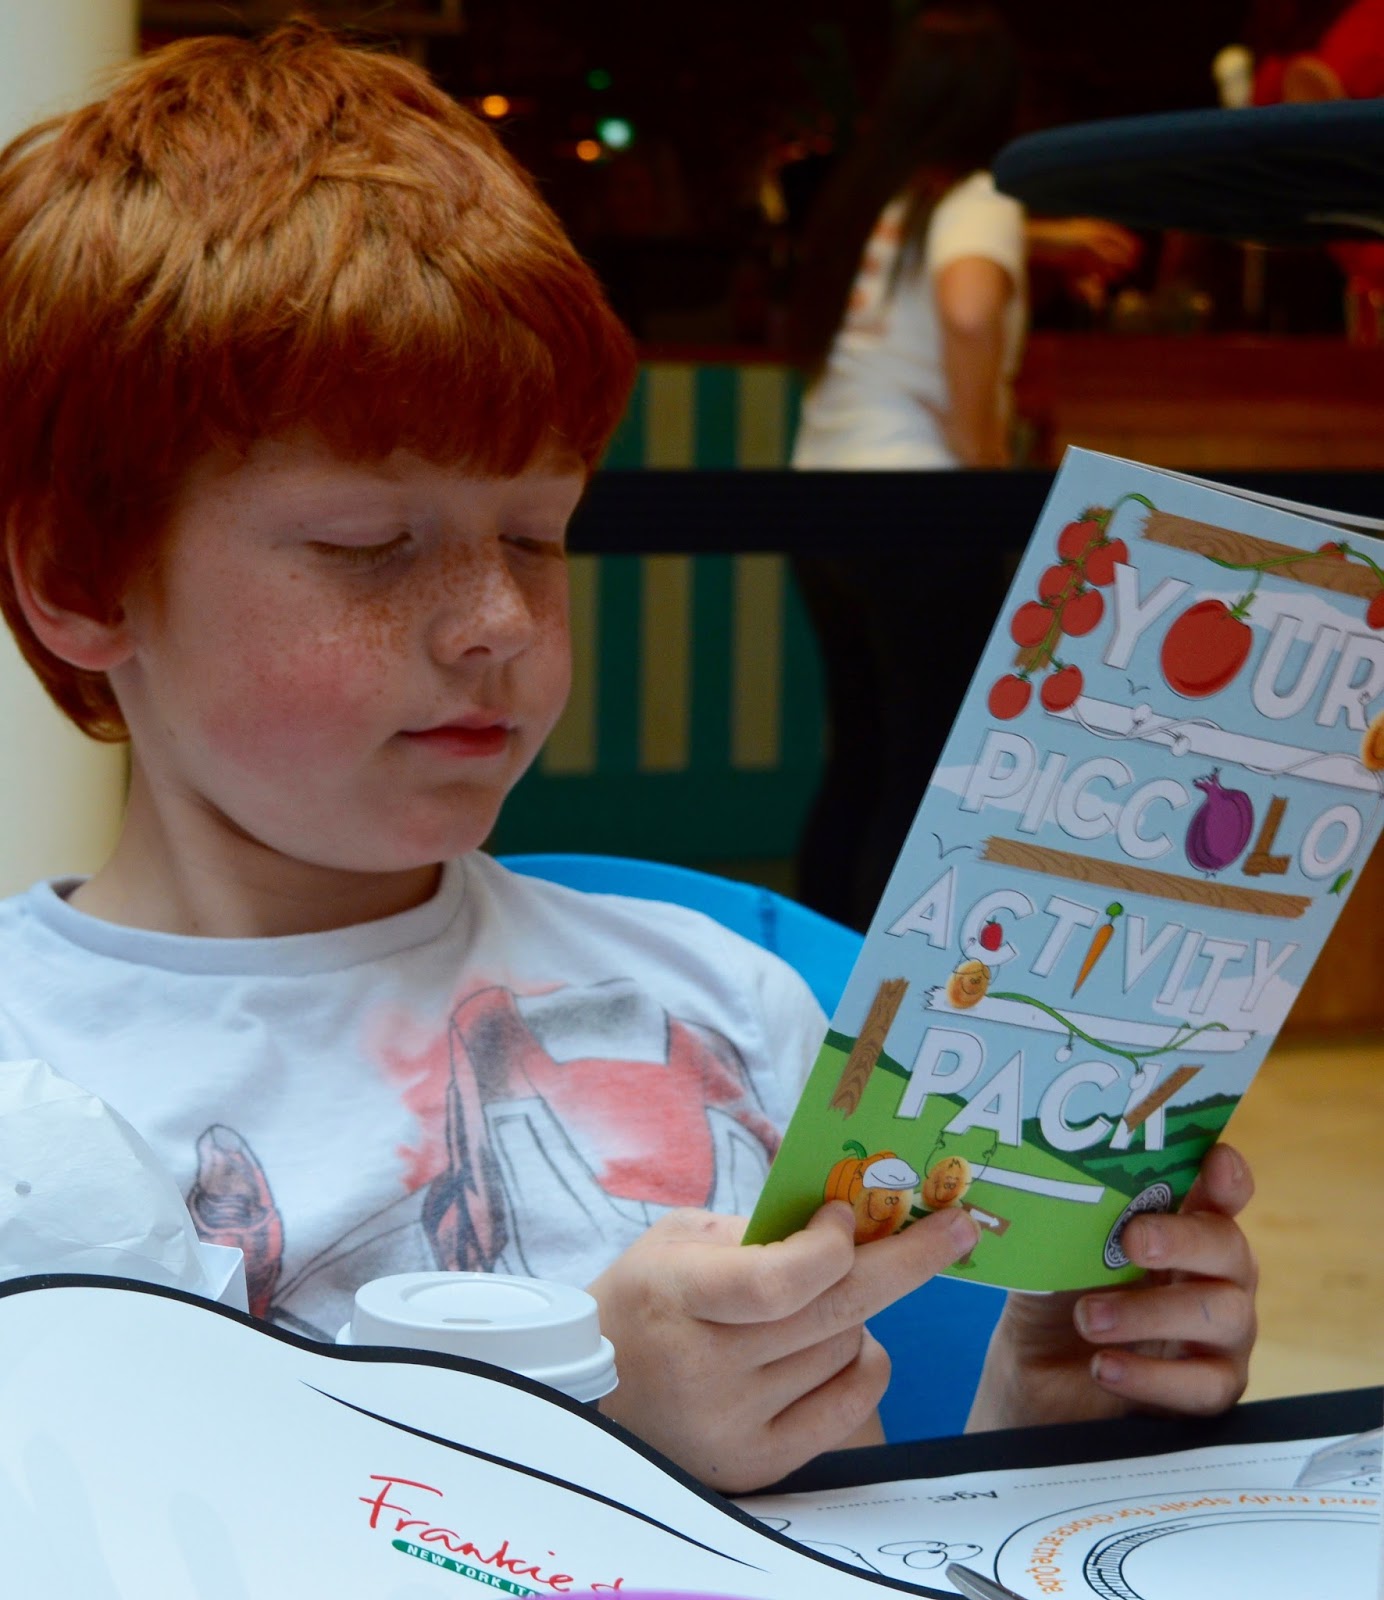 Our Guide to Family Dining & Children's Menus at intu Metrocentre restaurants